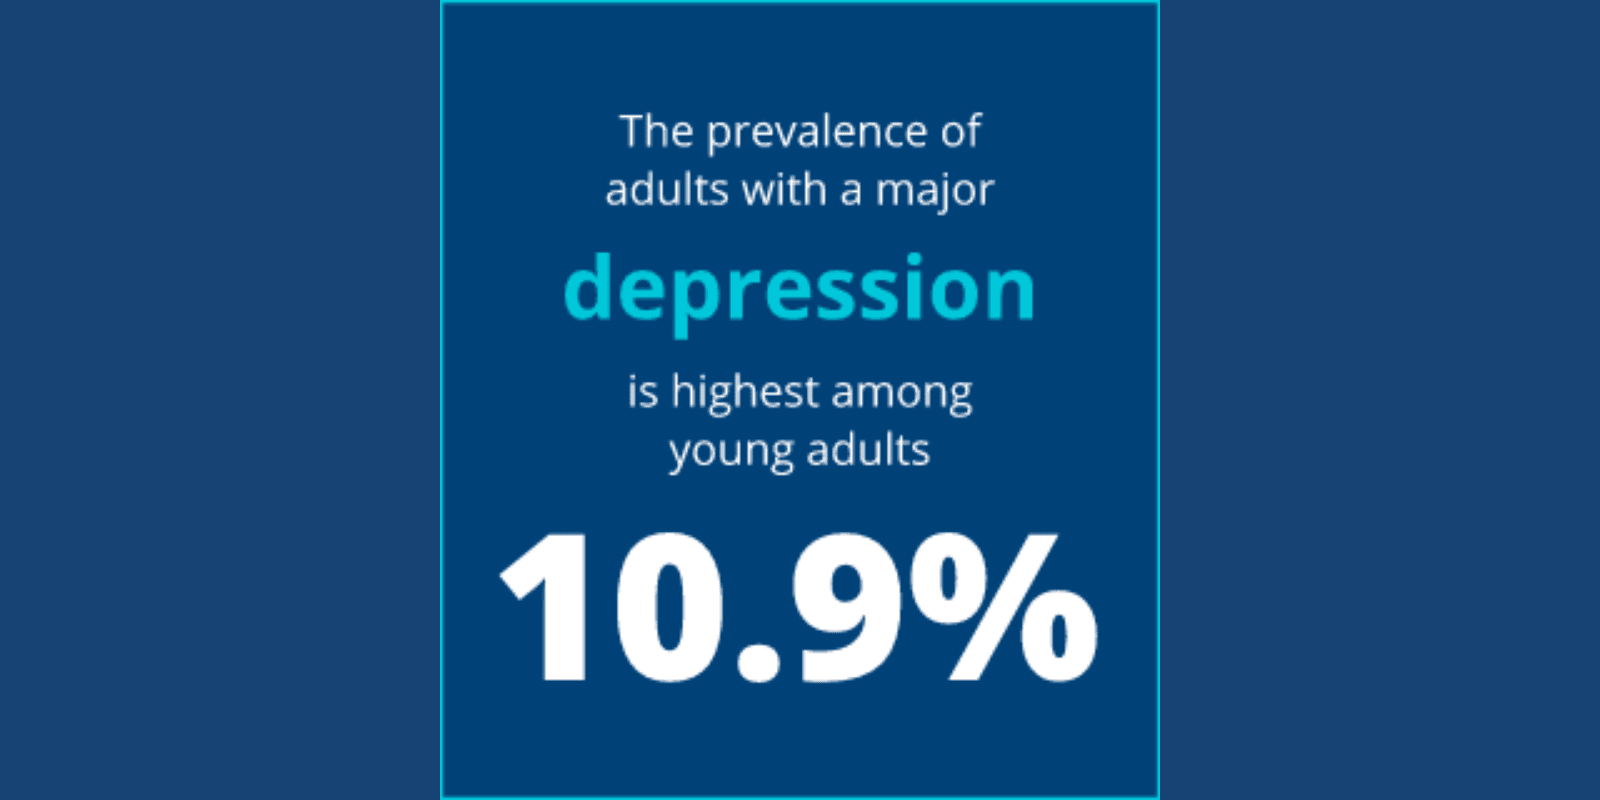 Adults with a major depression is highest among young adults